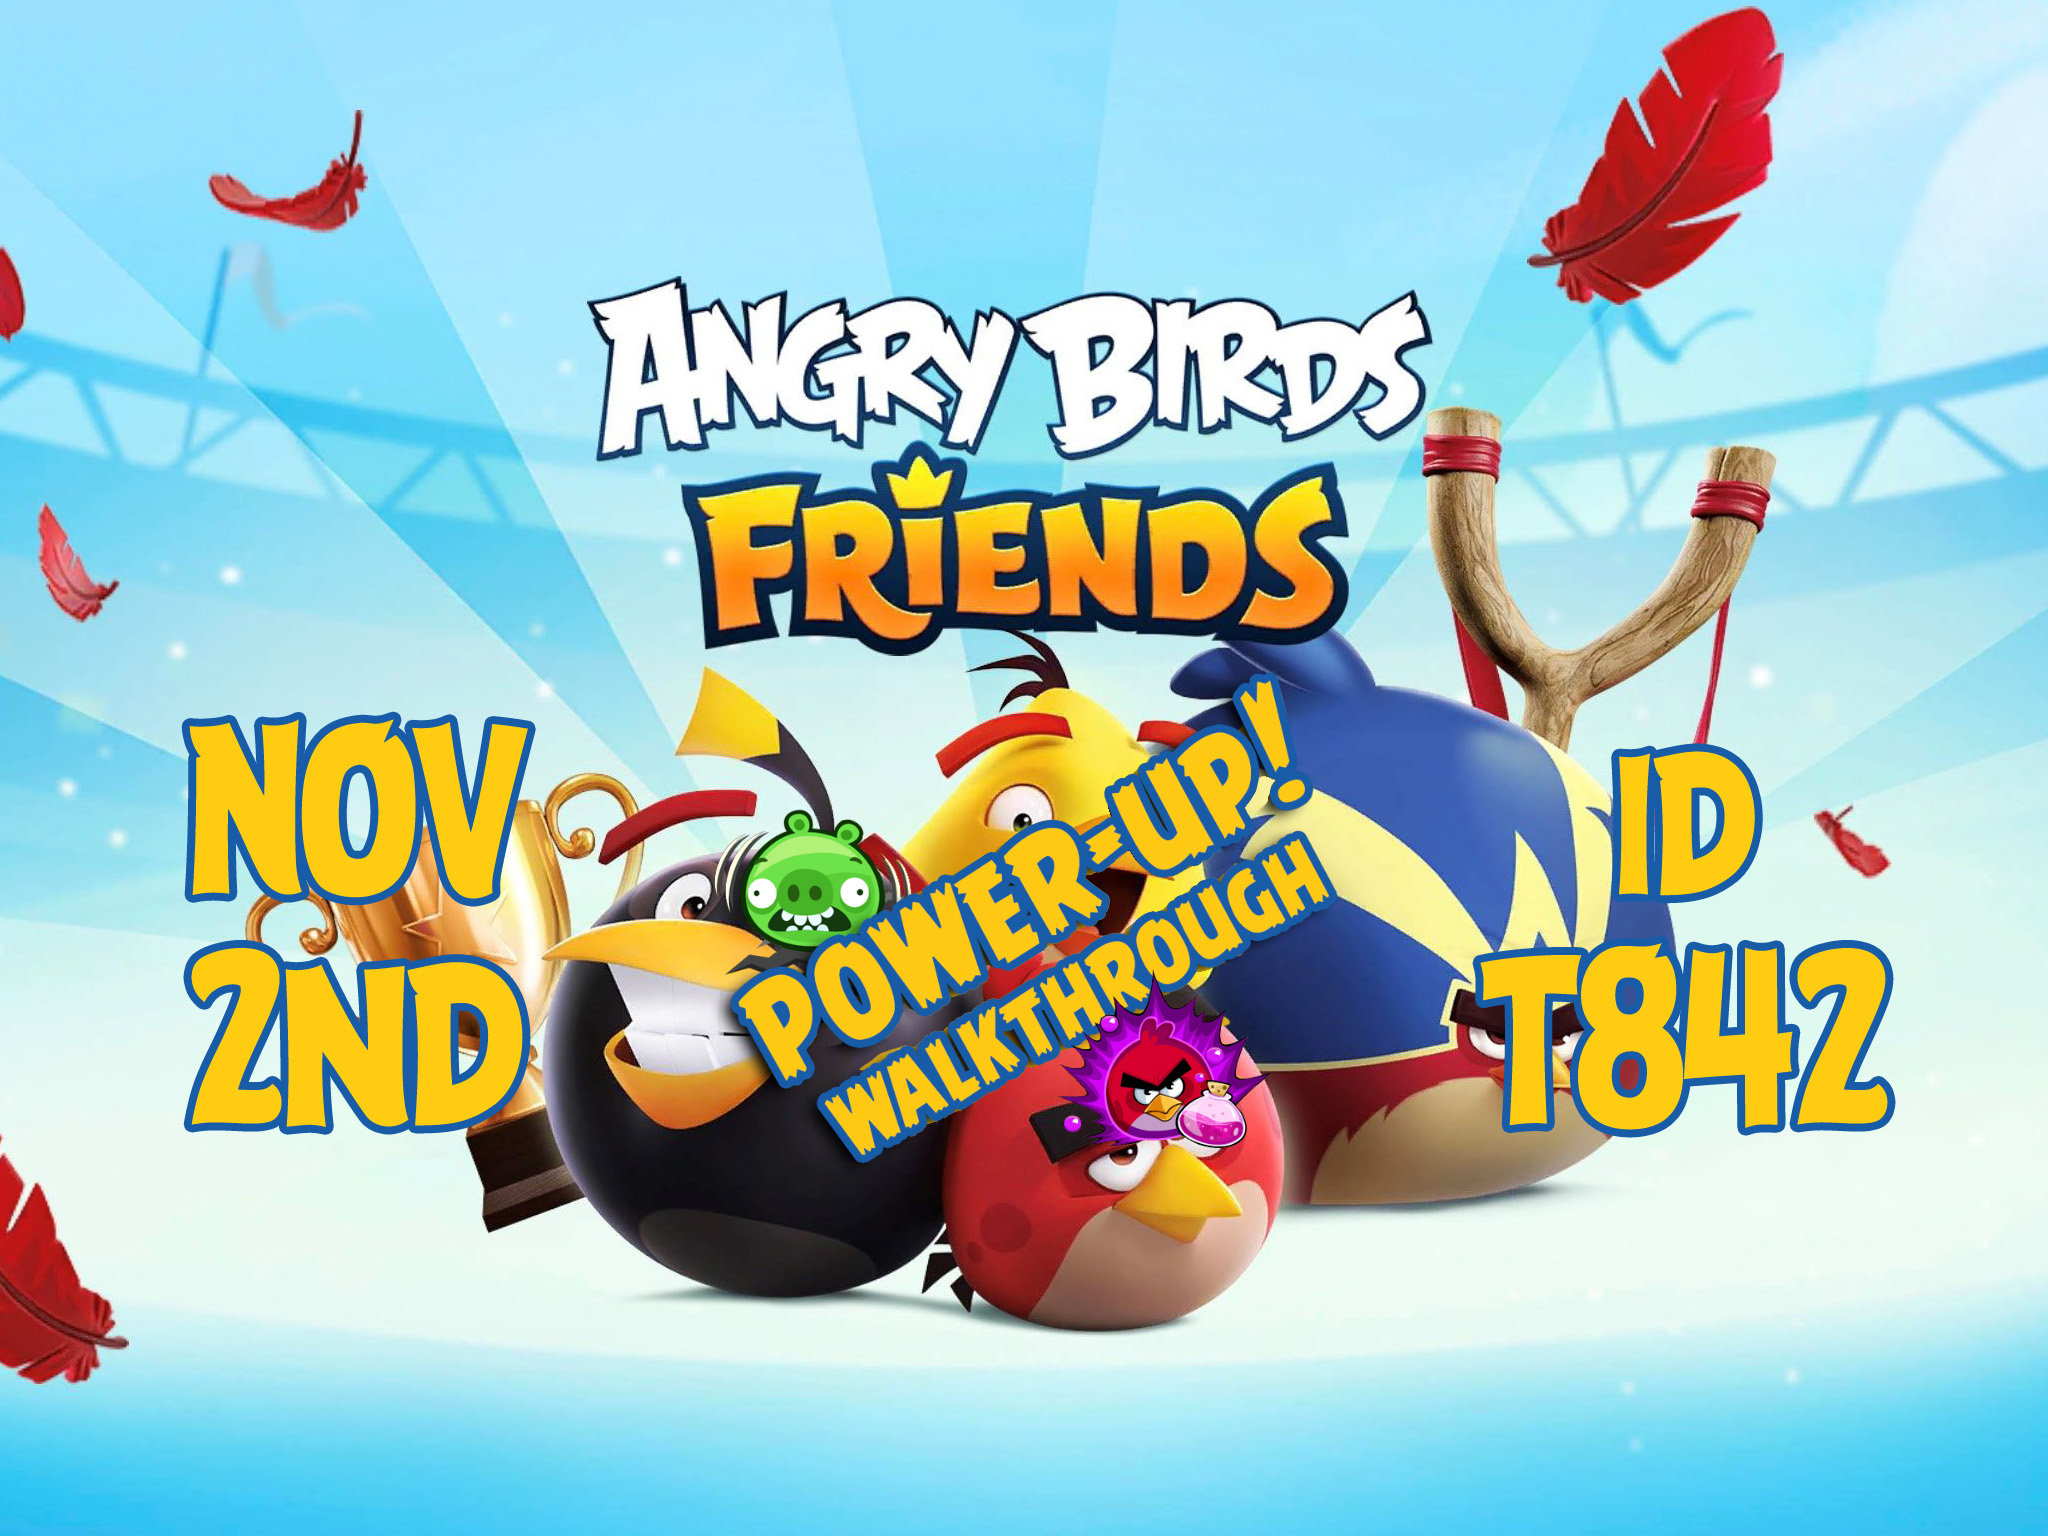 Angry-Birds-Friends-Tournament-T842-Feature-Image-PU